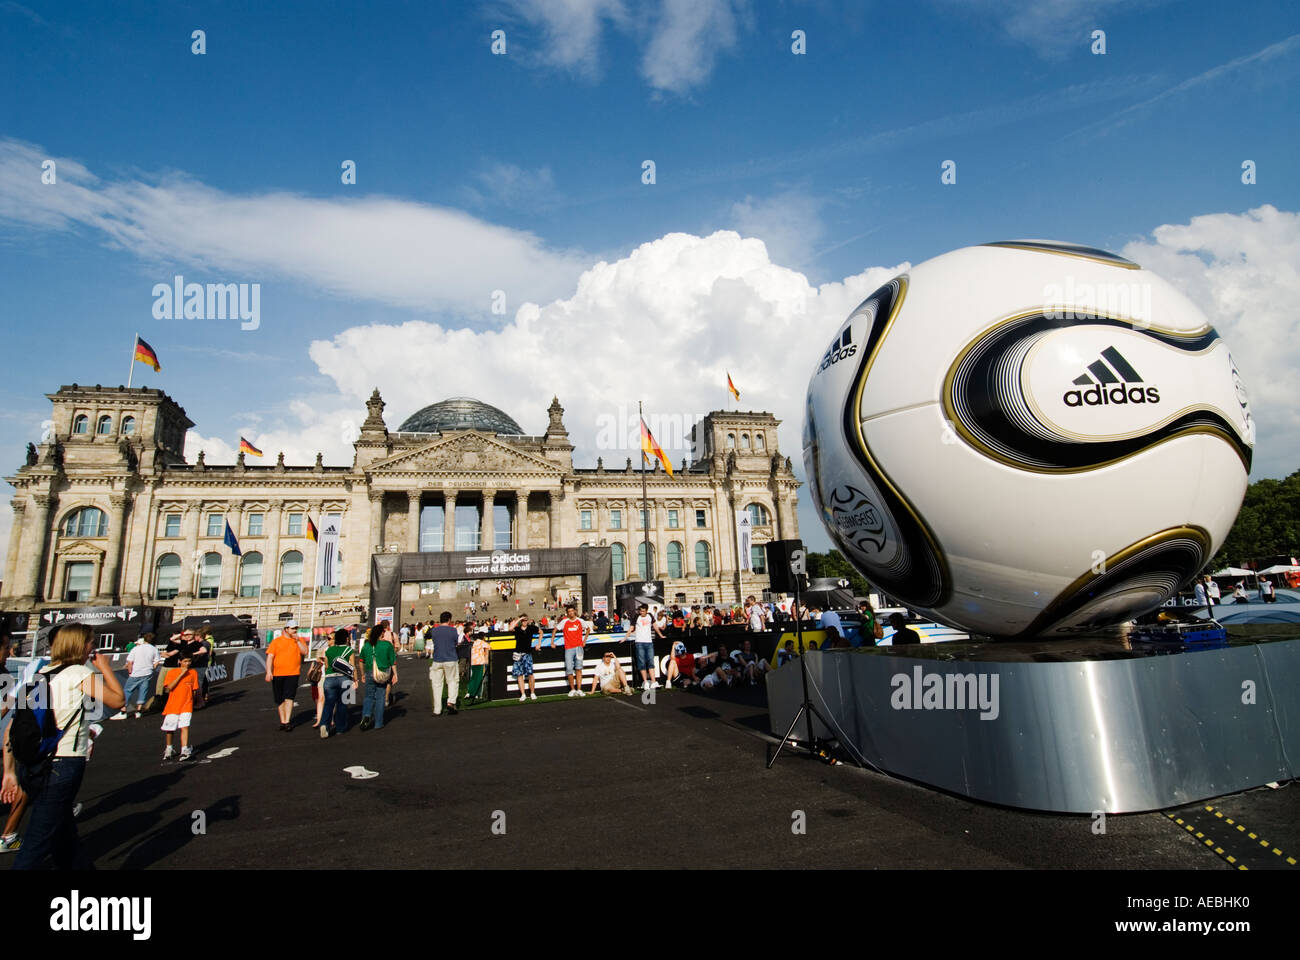 Large football in Adidas World of Football opposite Reichstag during Word Cup 2006 in Berlin Germany Stock Photo